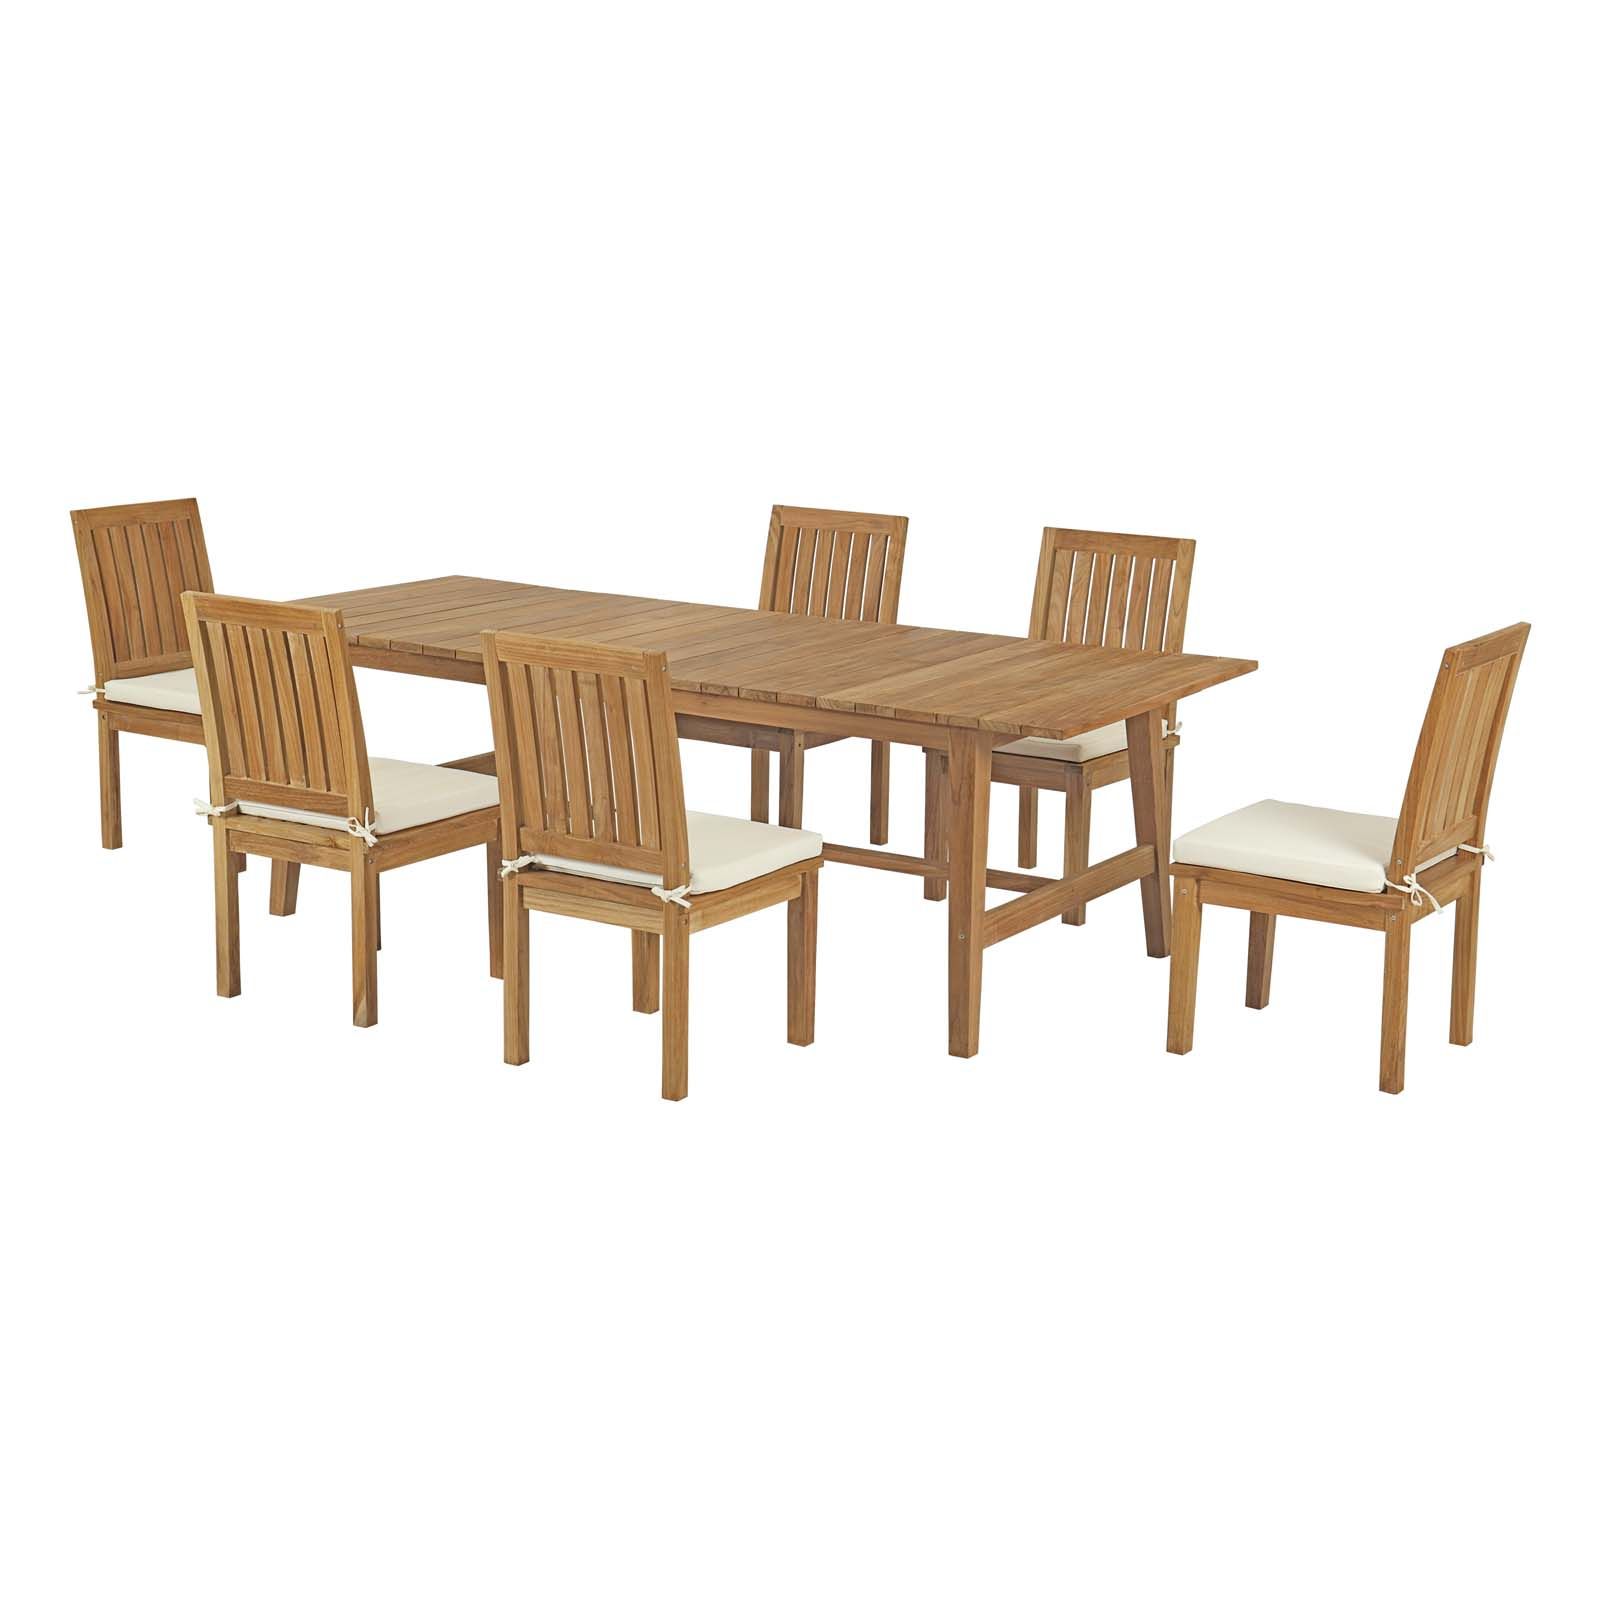 Marina 7 Piece Outdoor Patio Teak Outdoor Dining Set With Famous 7 Piece Teak Wood Dining Sets (View 14 of 15)